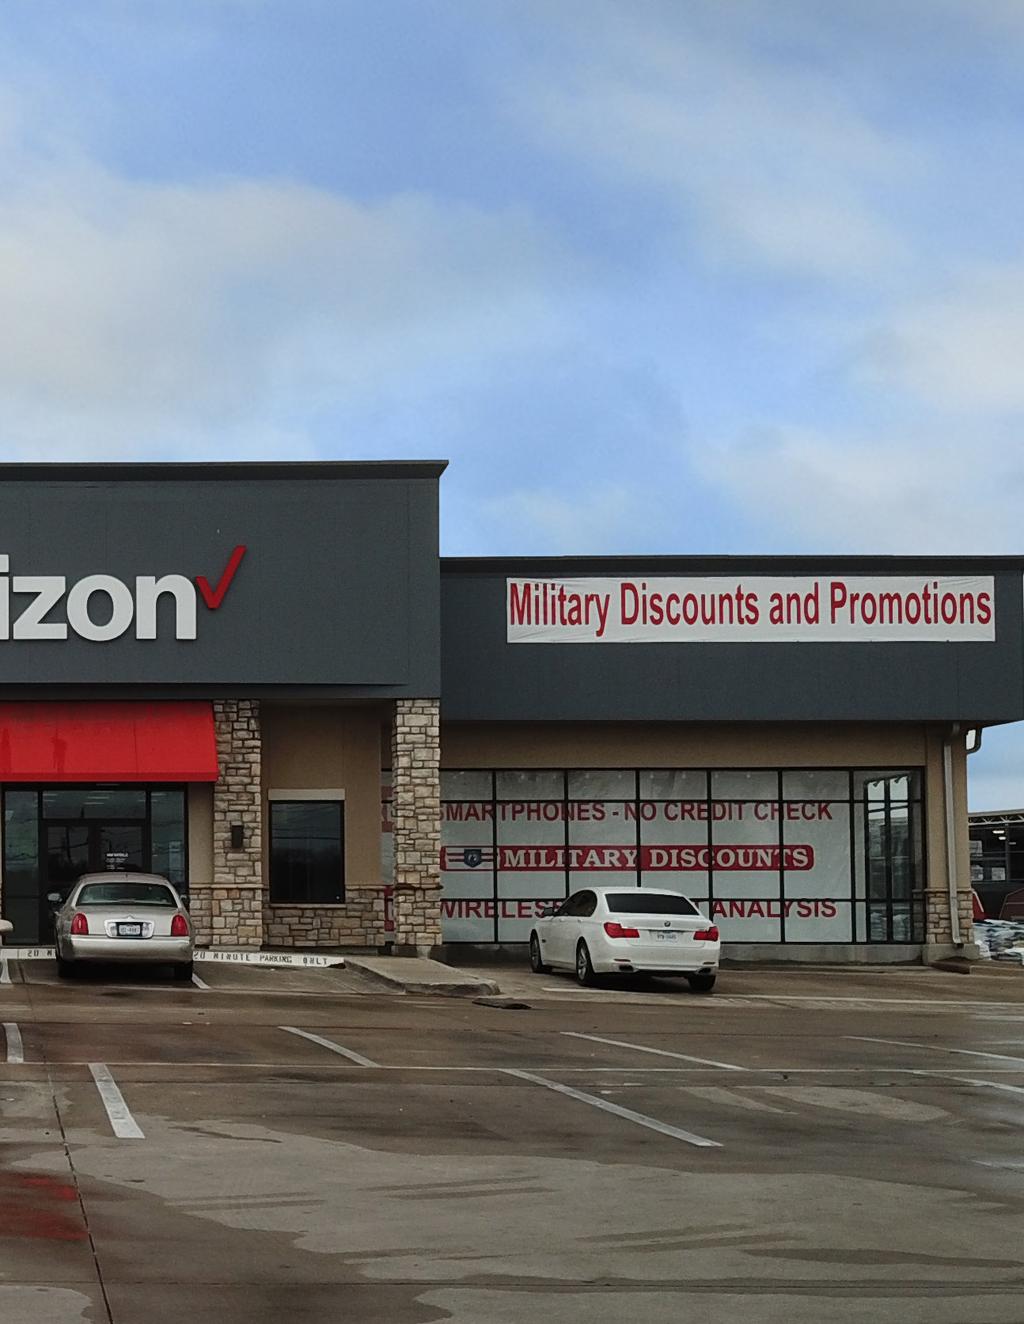 THIS OFFERING PRESENTS the opportunity to acquire a Single Tenant leased investment located in Fort Worth, TX. The property is leased to Verizon Wireless.